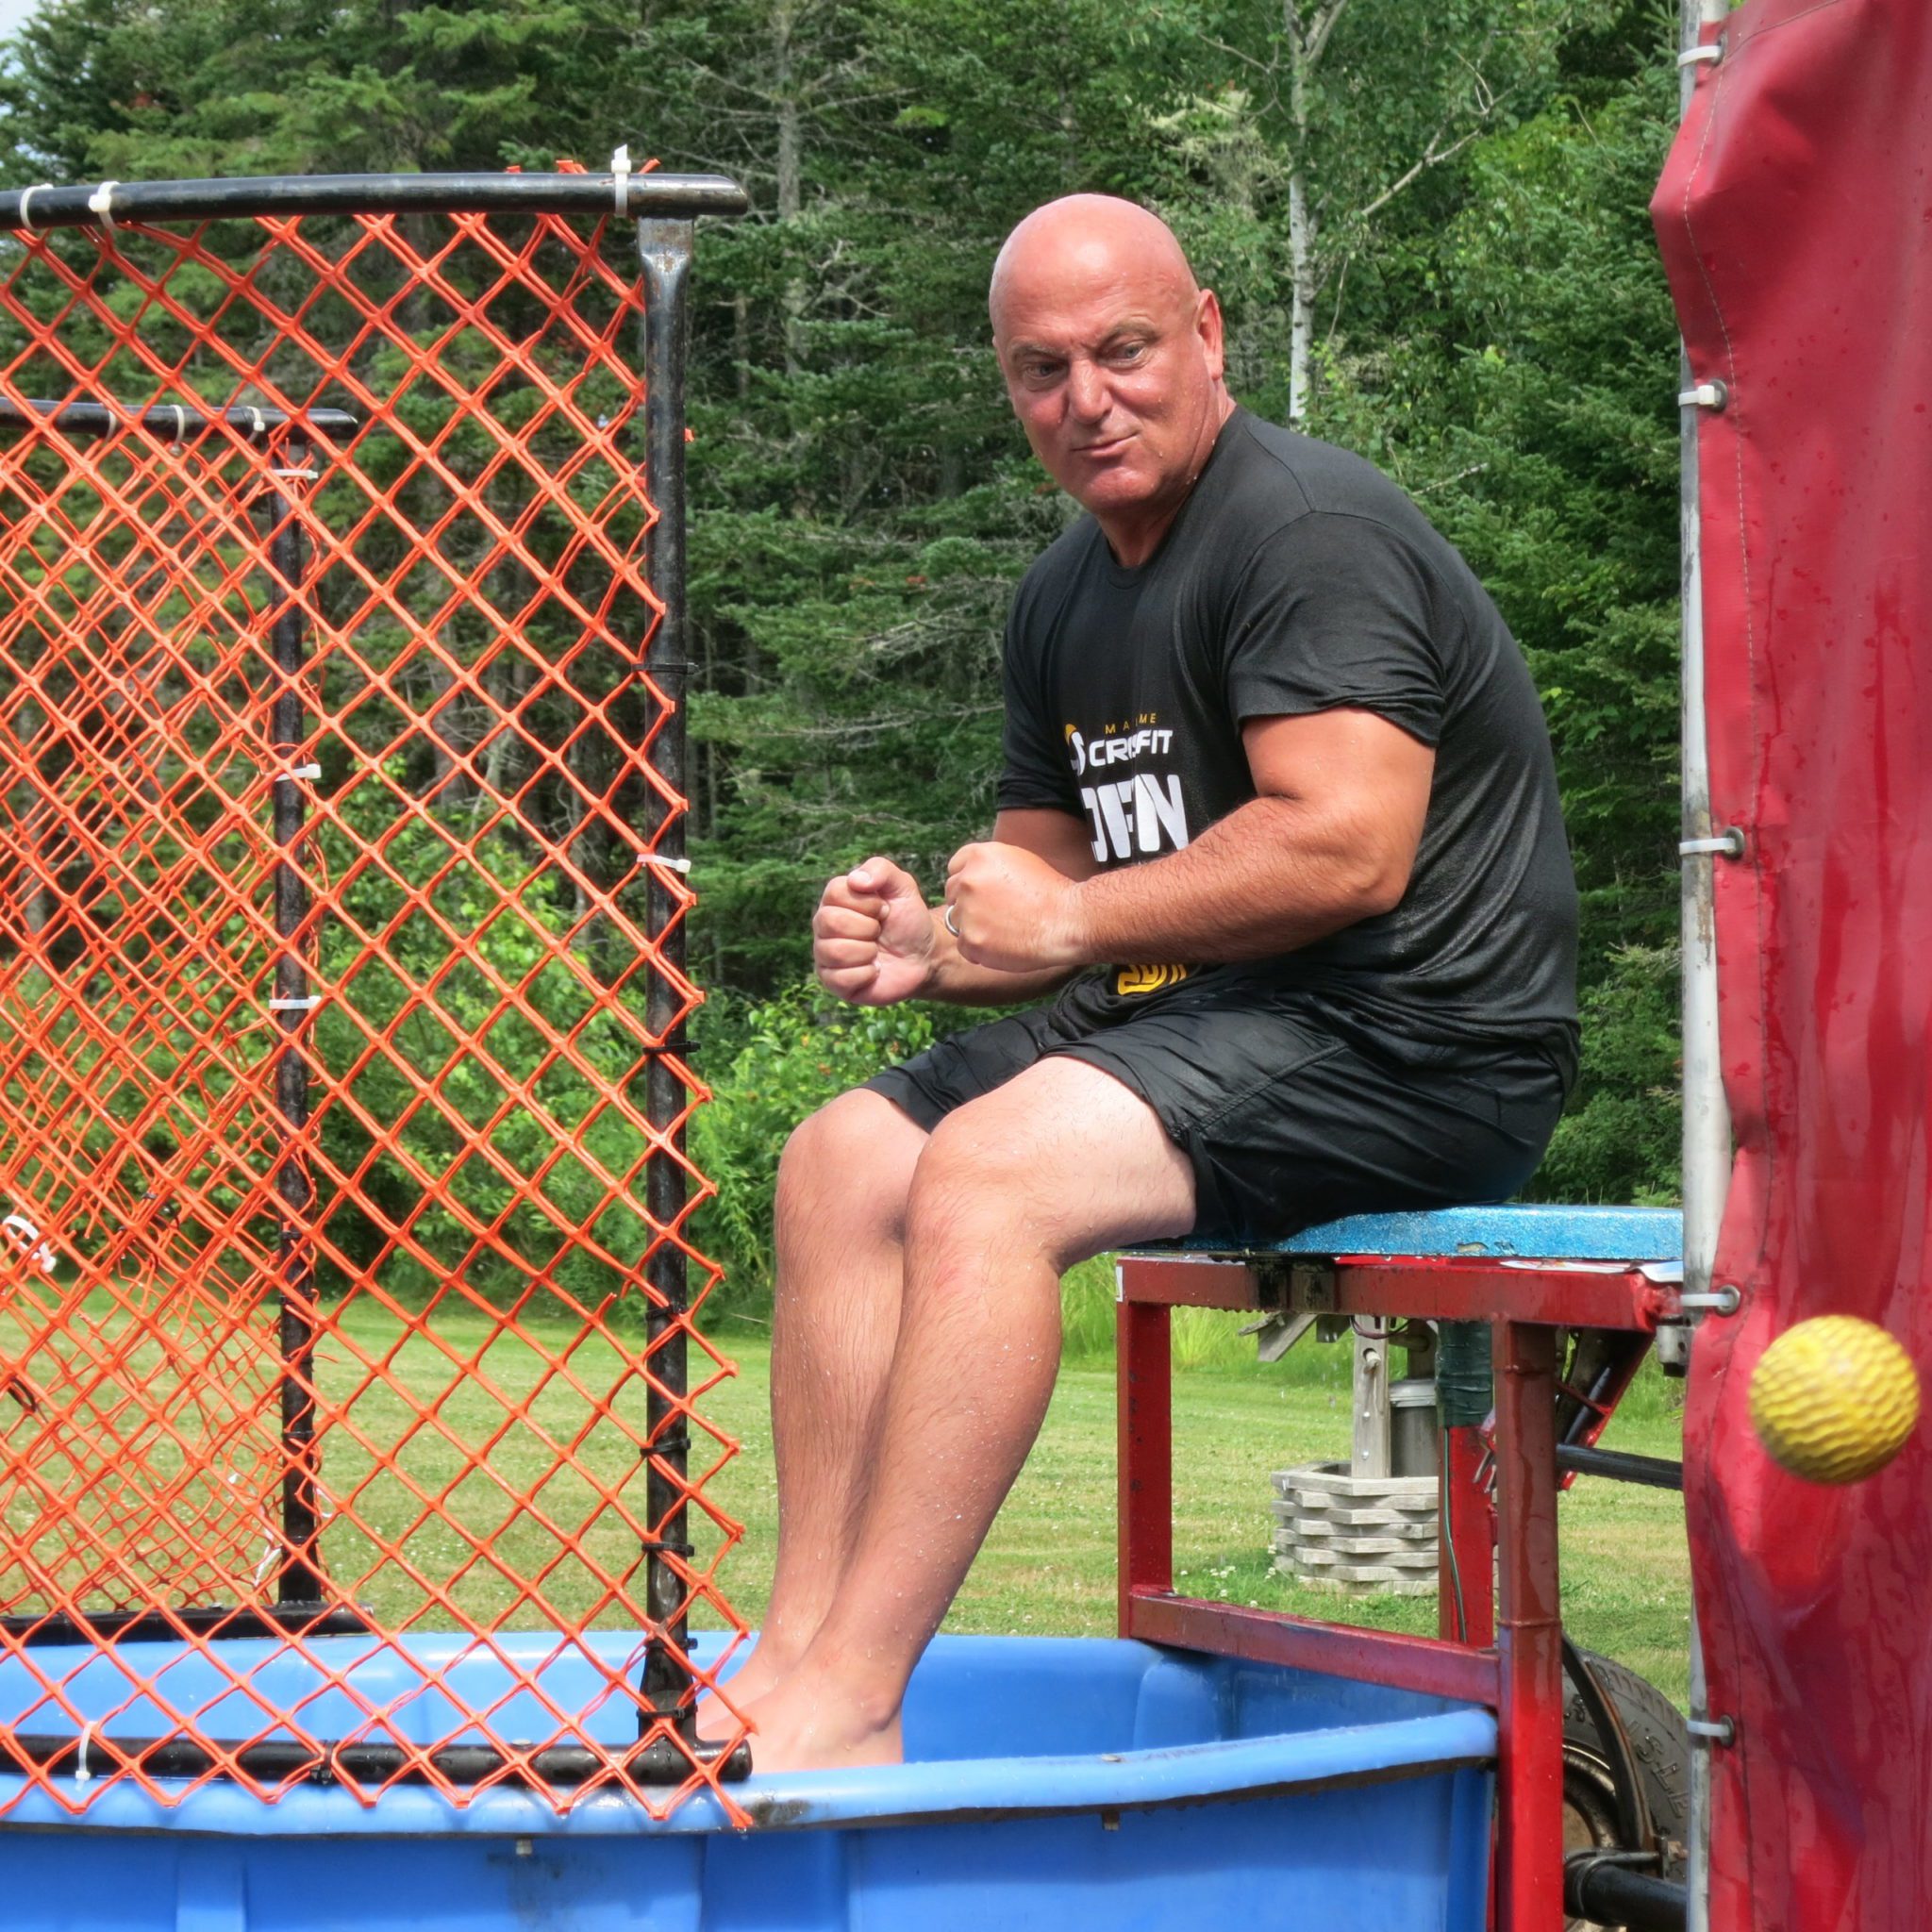 Tim getting dunked for charity